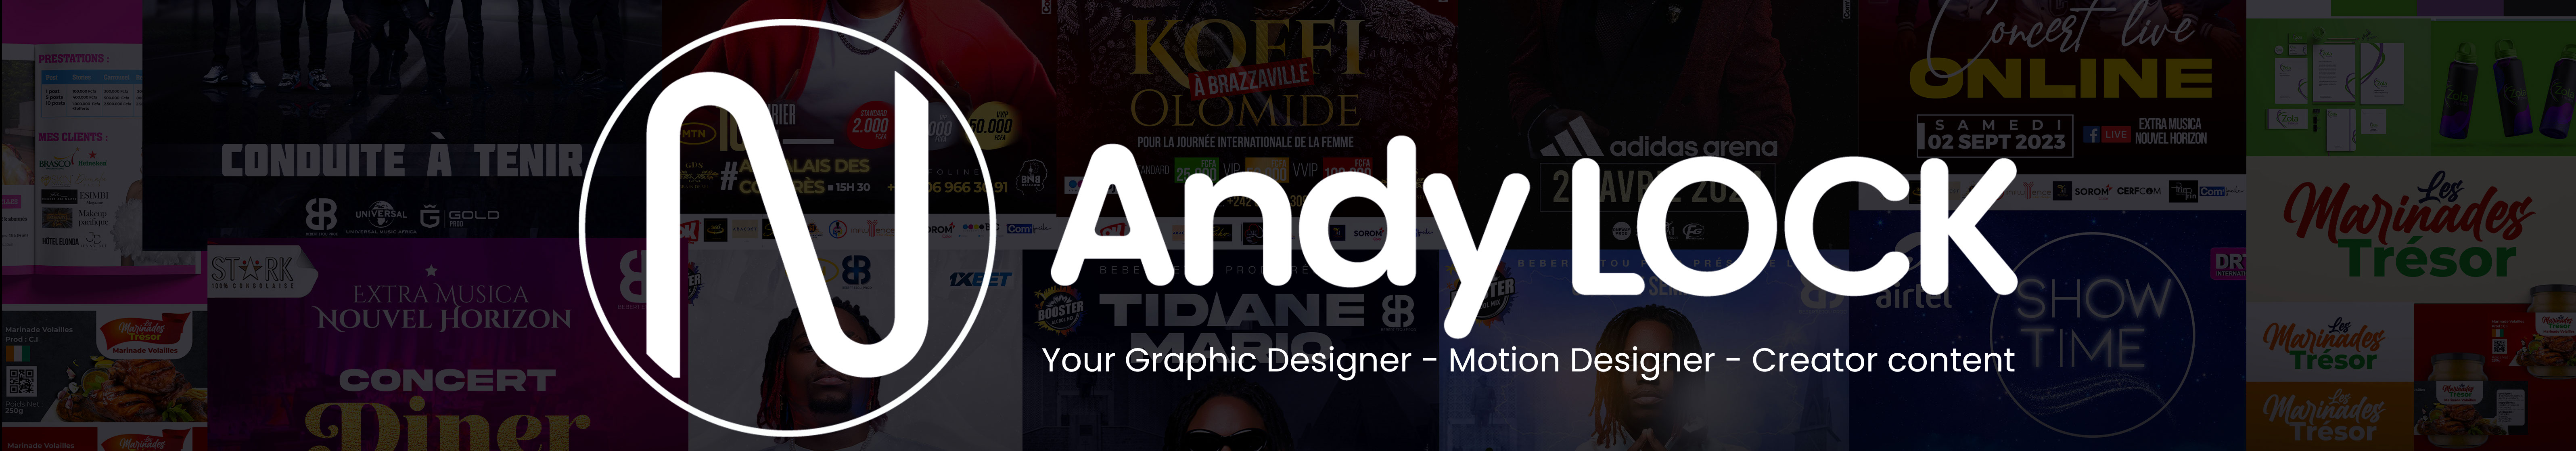 Andy Lock's profile banner